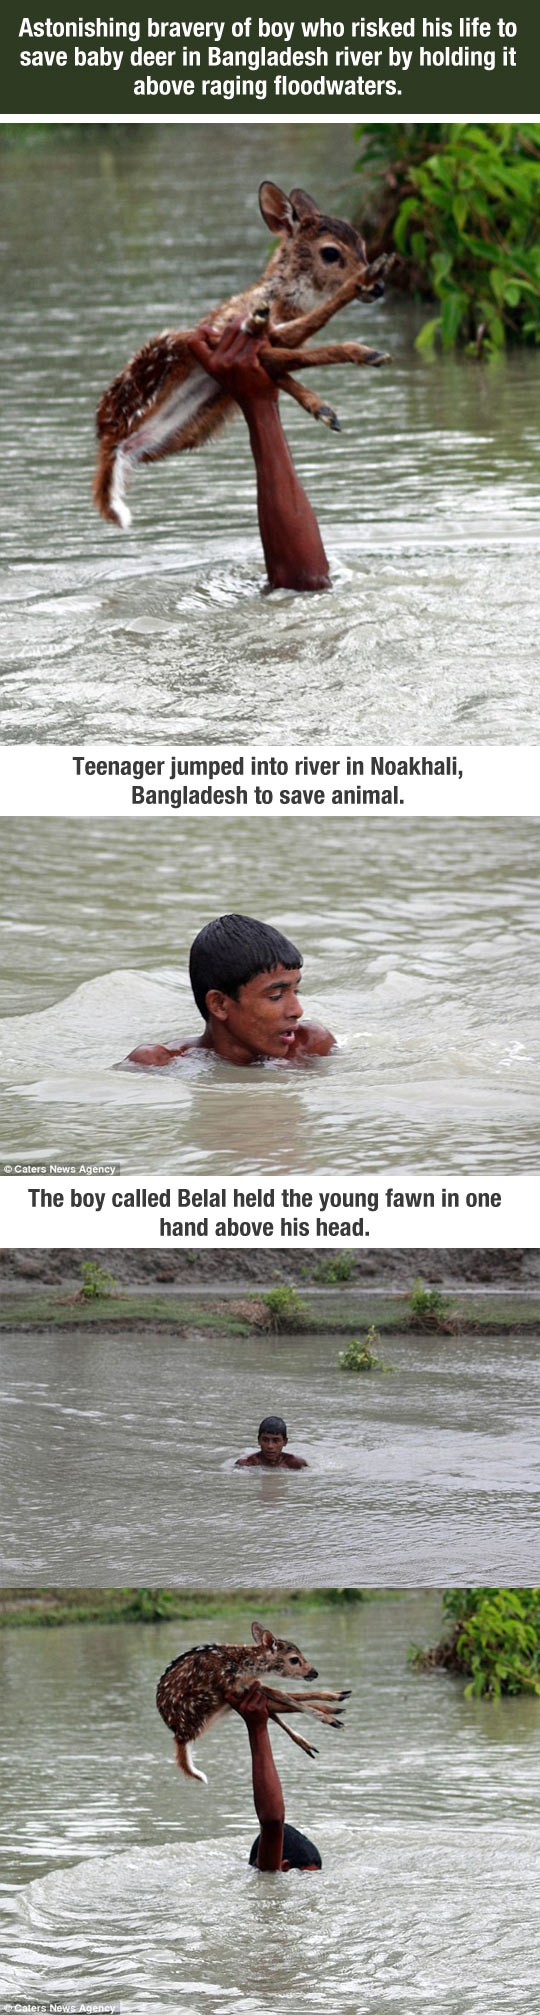 Boy risked his life to save baby deer...